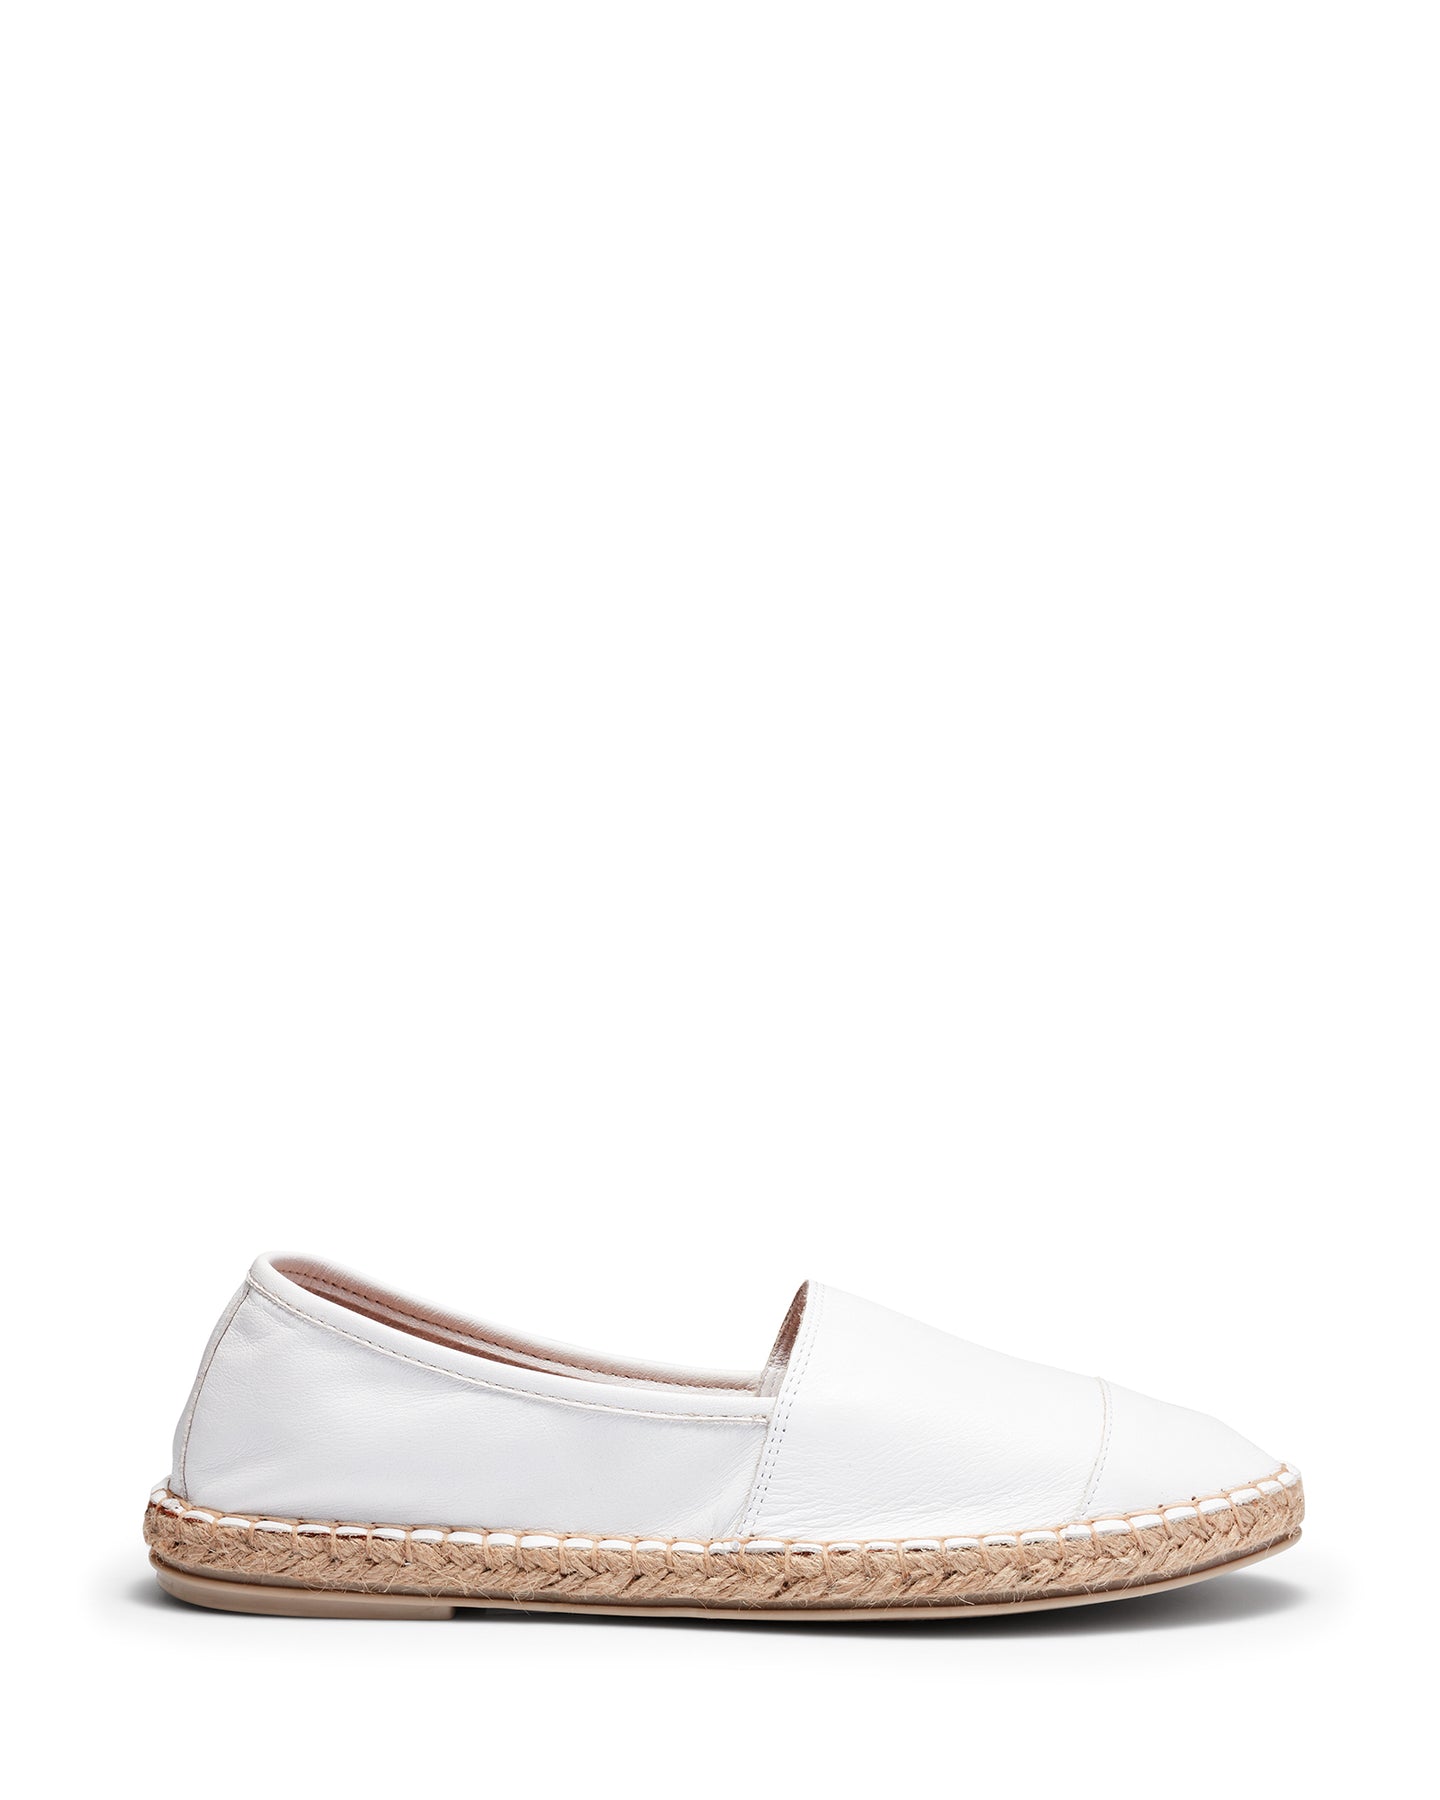 Just Because Shoes Adem White | Leather Flats | Espadrille | Slip On 